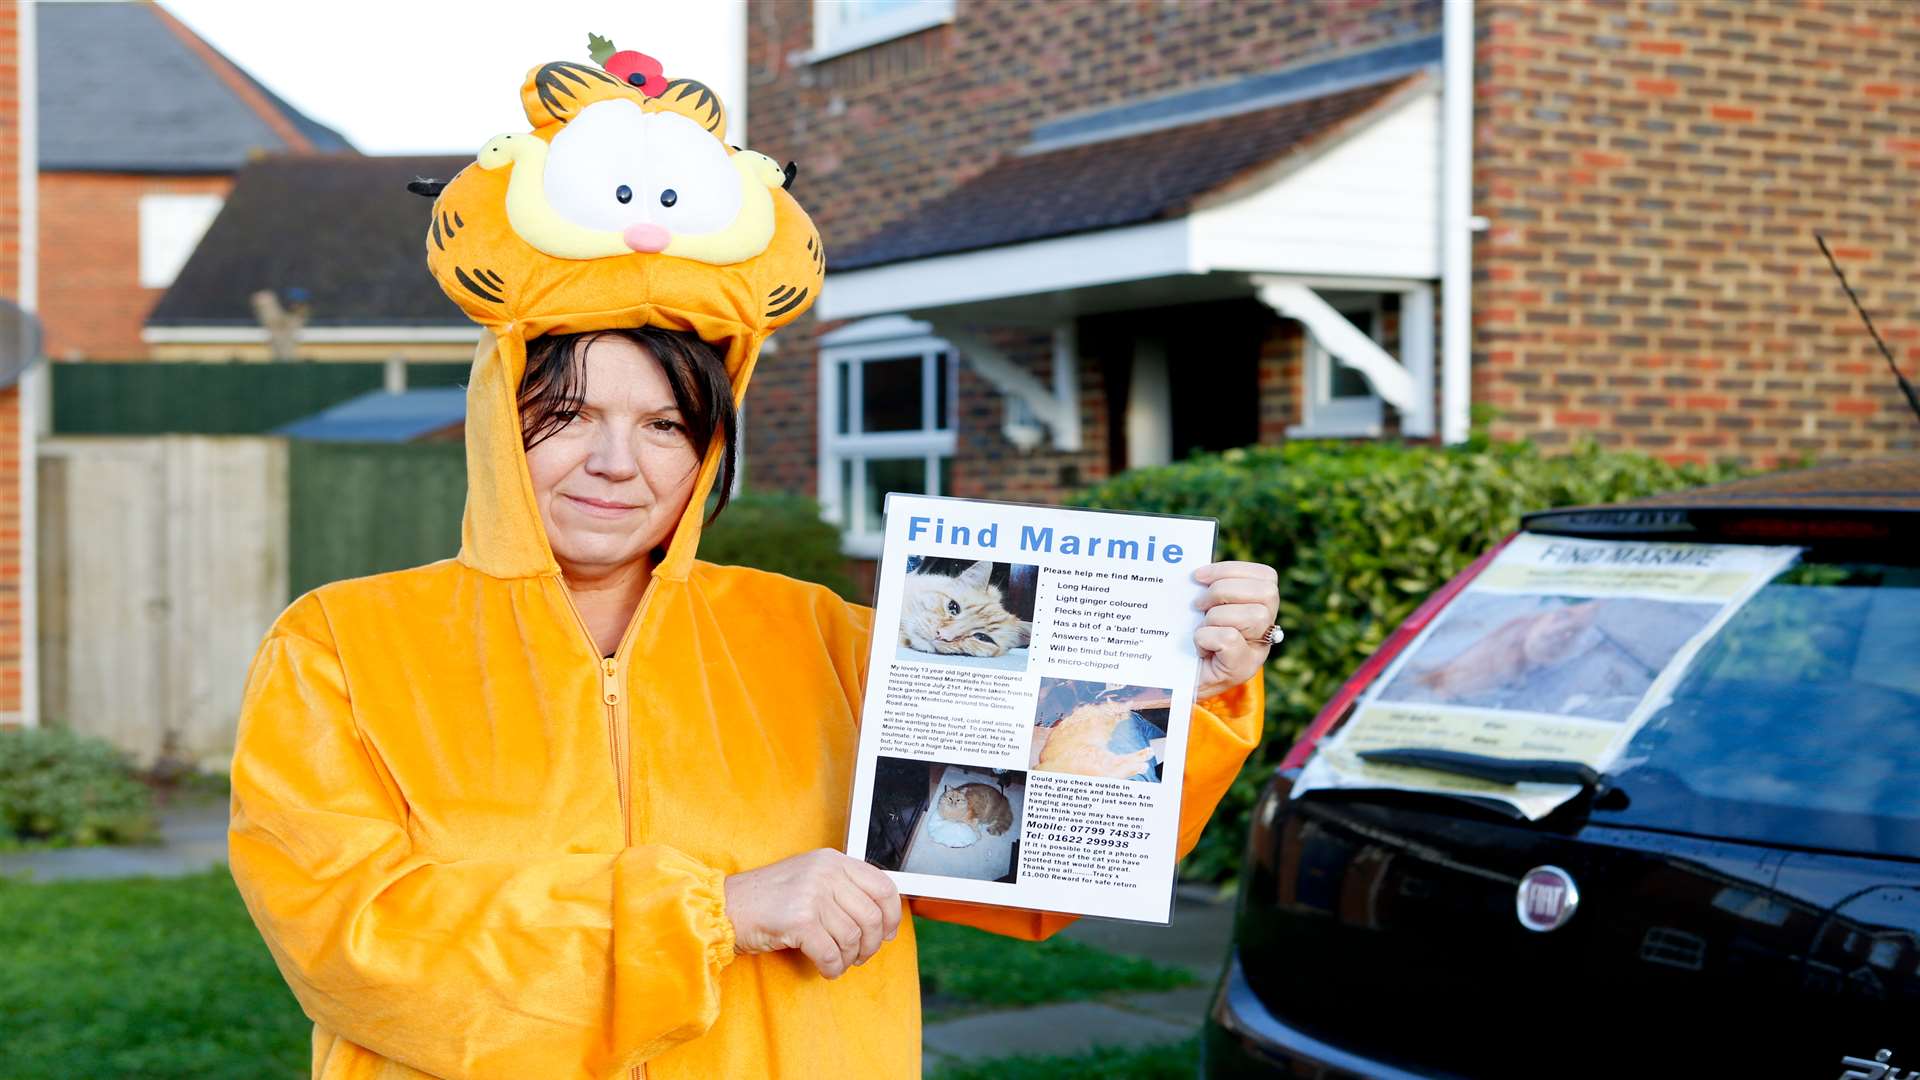 Tracy Brewster prepares to leave her home for a 50 mile walk from Kent to Essex dressed as Garfield to raise awareness of her campaign to find her missing cat